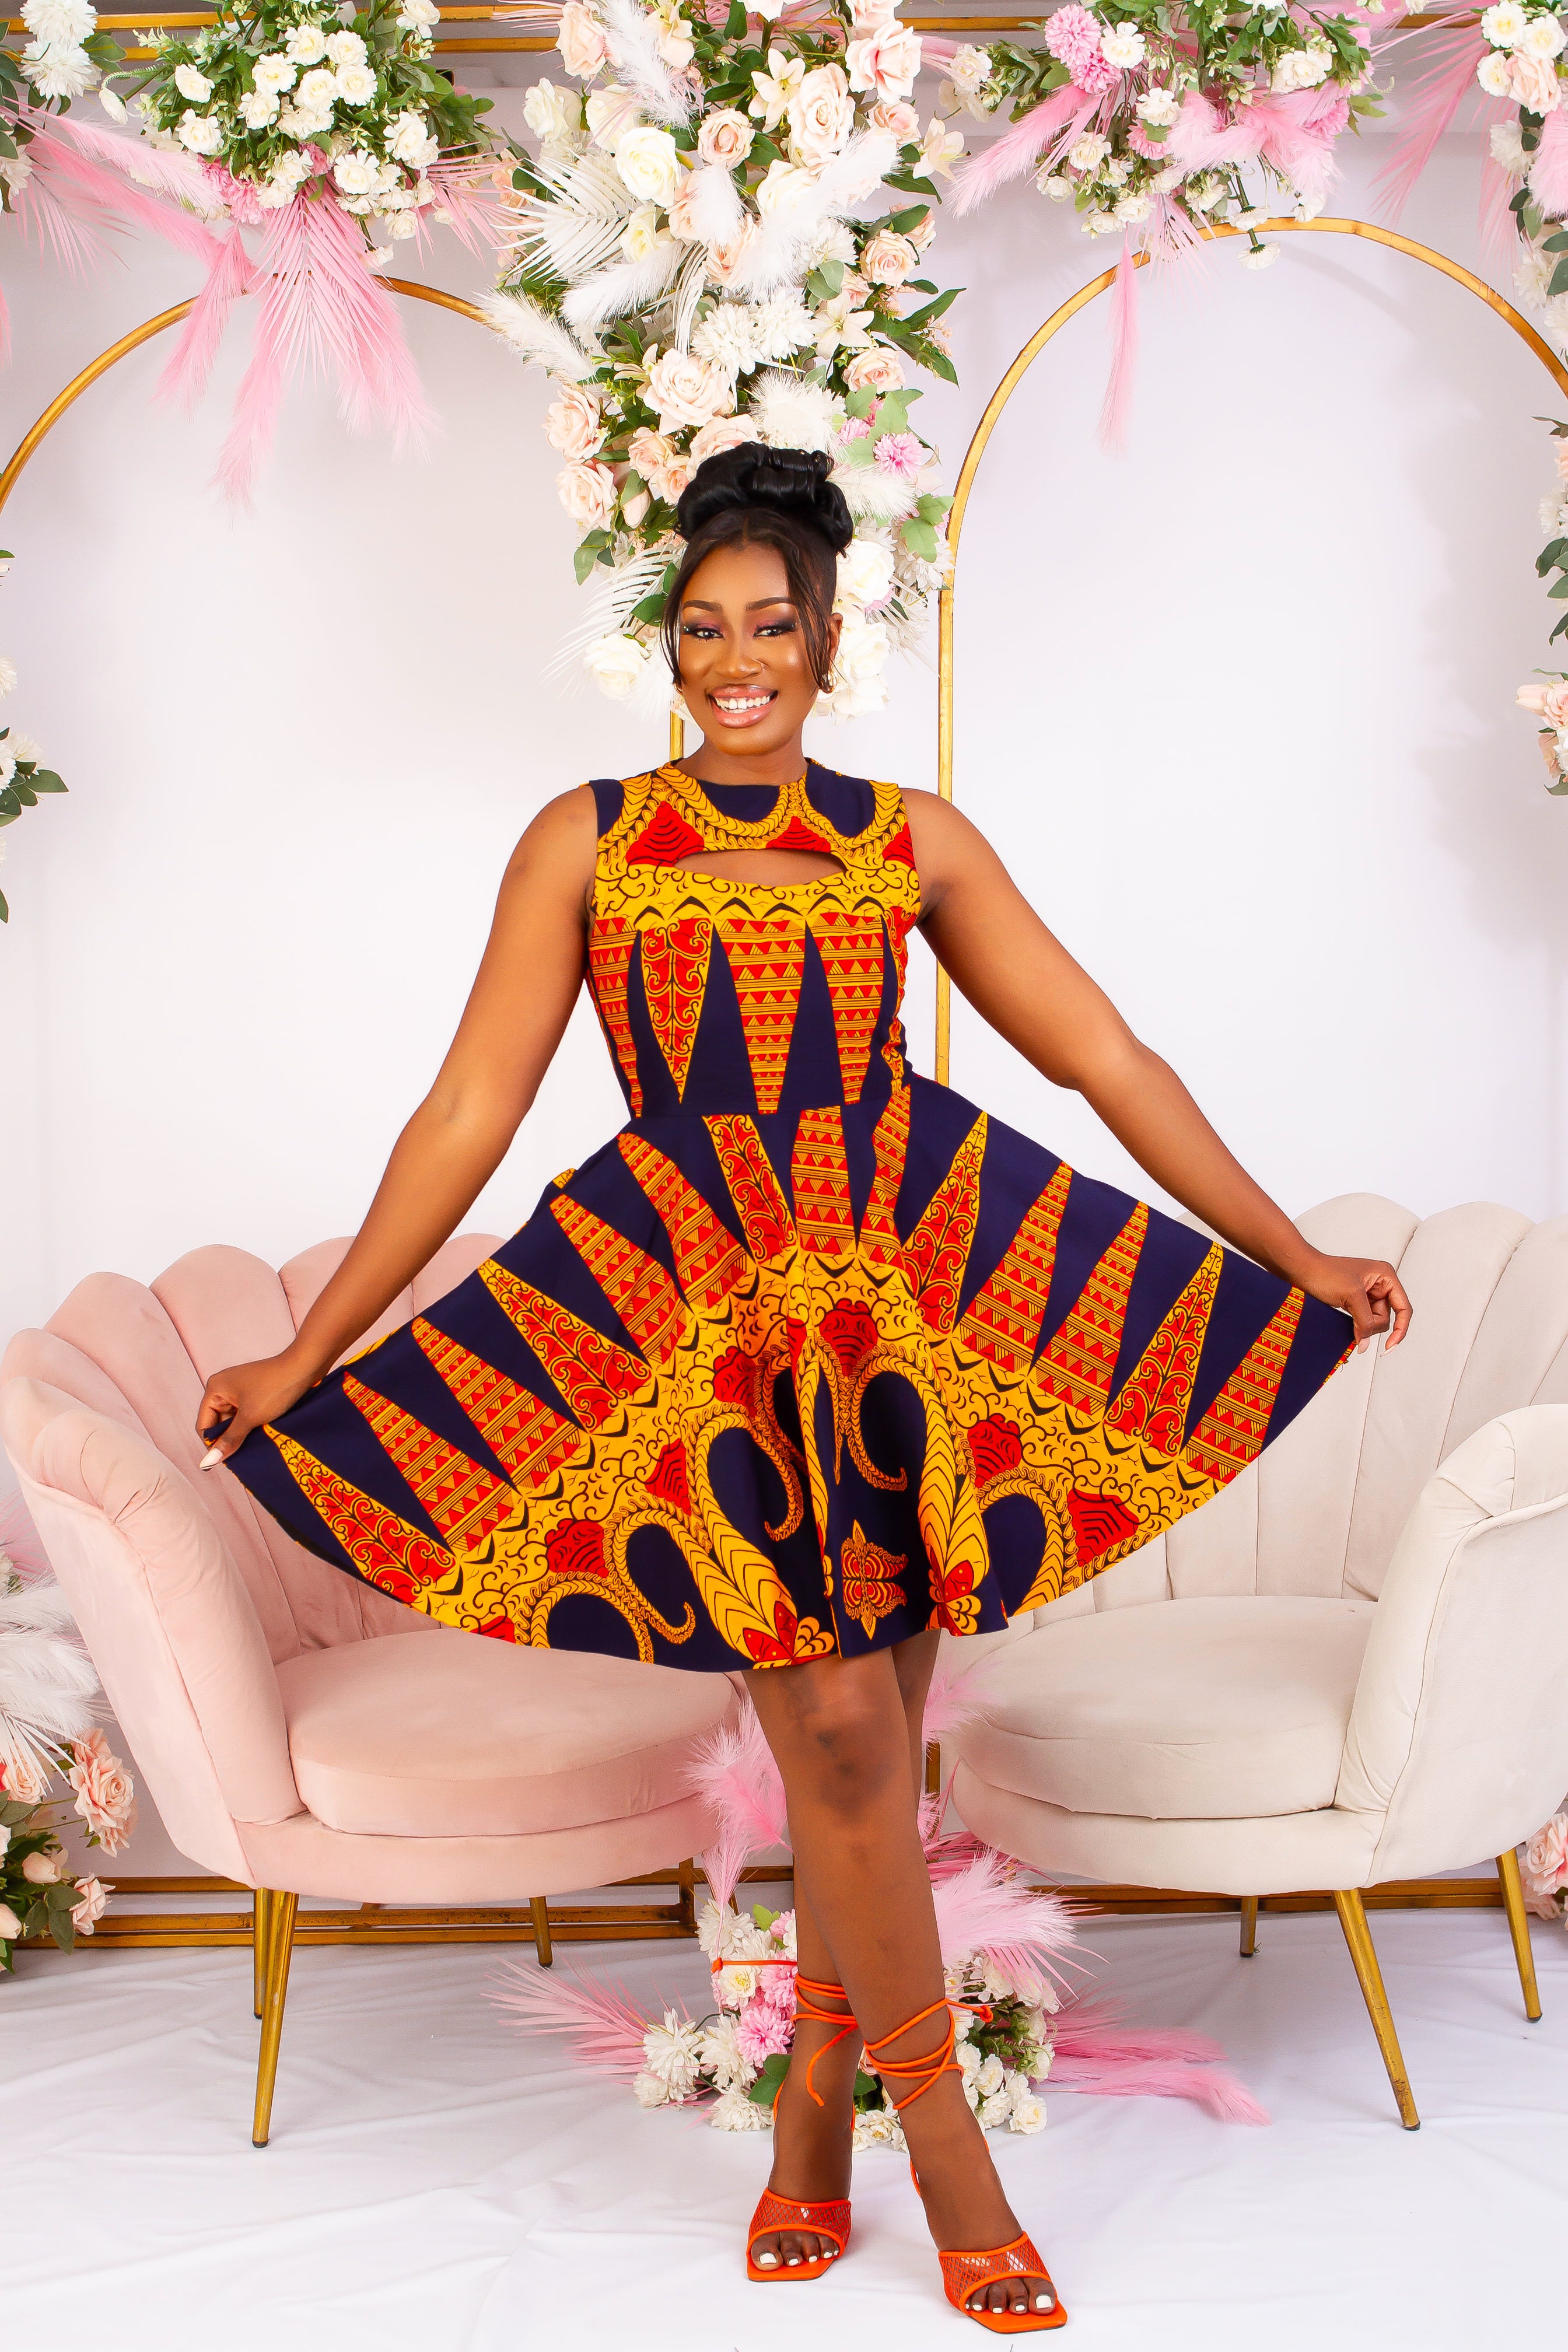 Vibrant Yellow and Navy Blue African Print flare mini dress perfect for a special occasion. Sleeveless with bust cut out for an edgy and chic look. Shop Ghana African print dress | African short dresses | African print gown | African Clothing Online Shop | Maxi African dress | African women's clothing | kitenge dresses | Africa Dresses for Women | African dresses for wedding | Danshiki Dress | Trendy African Dress | African clothing UK